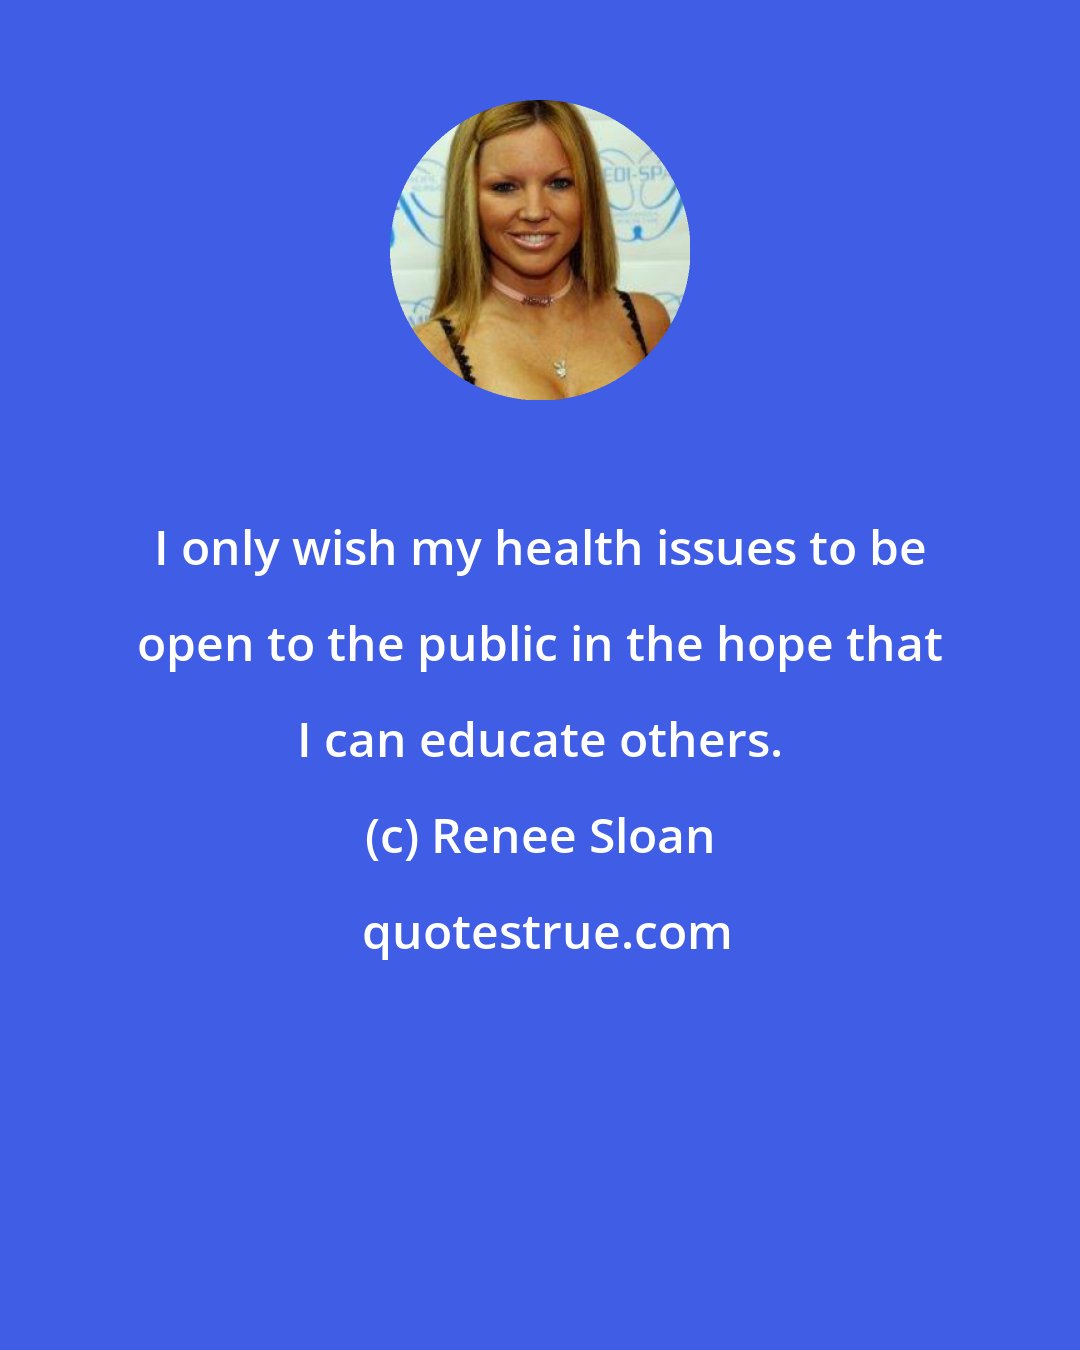 Renee Sloan: I only wish my health issues to be open to the public in the hope that I can educate others.